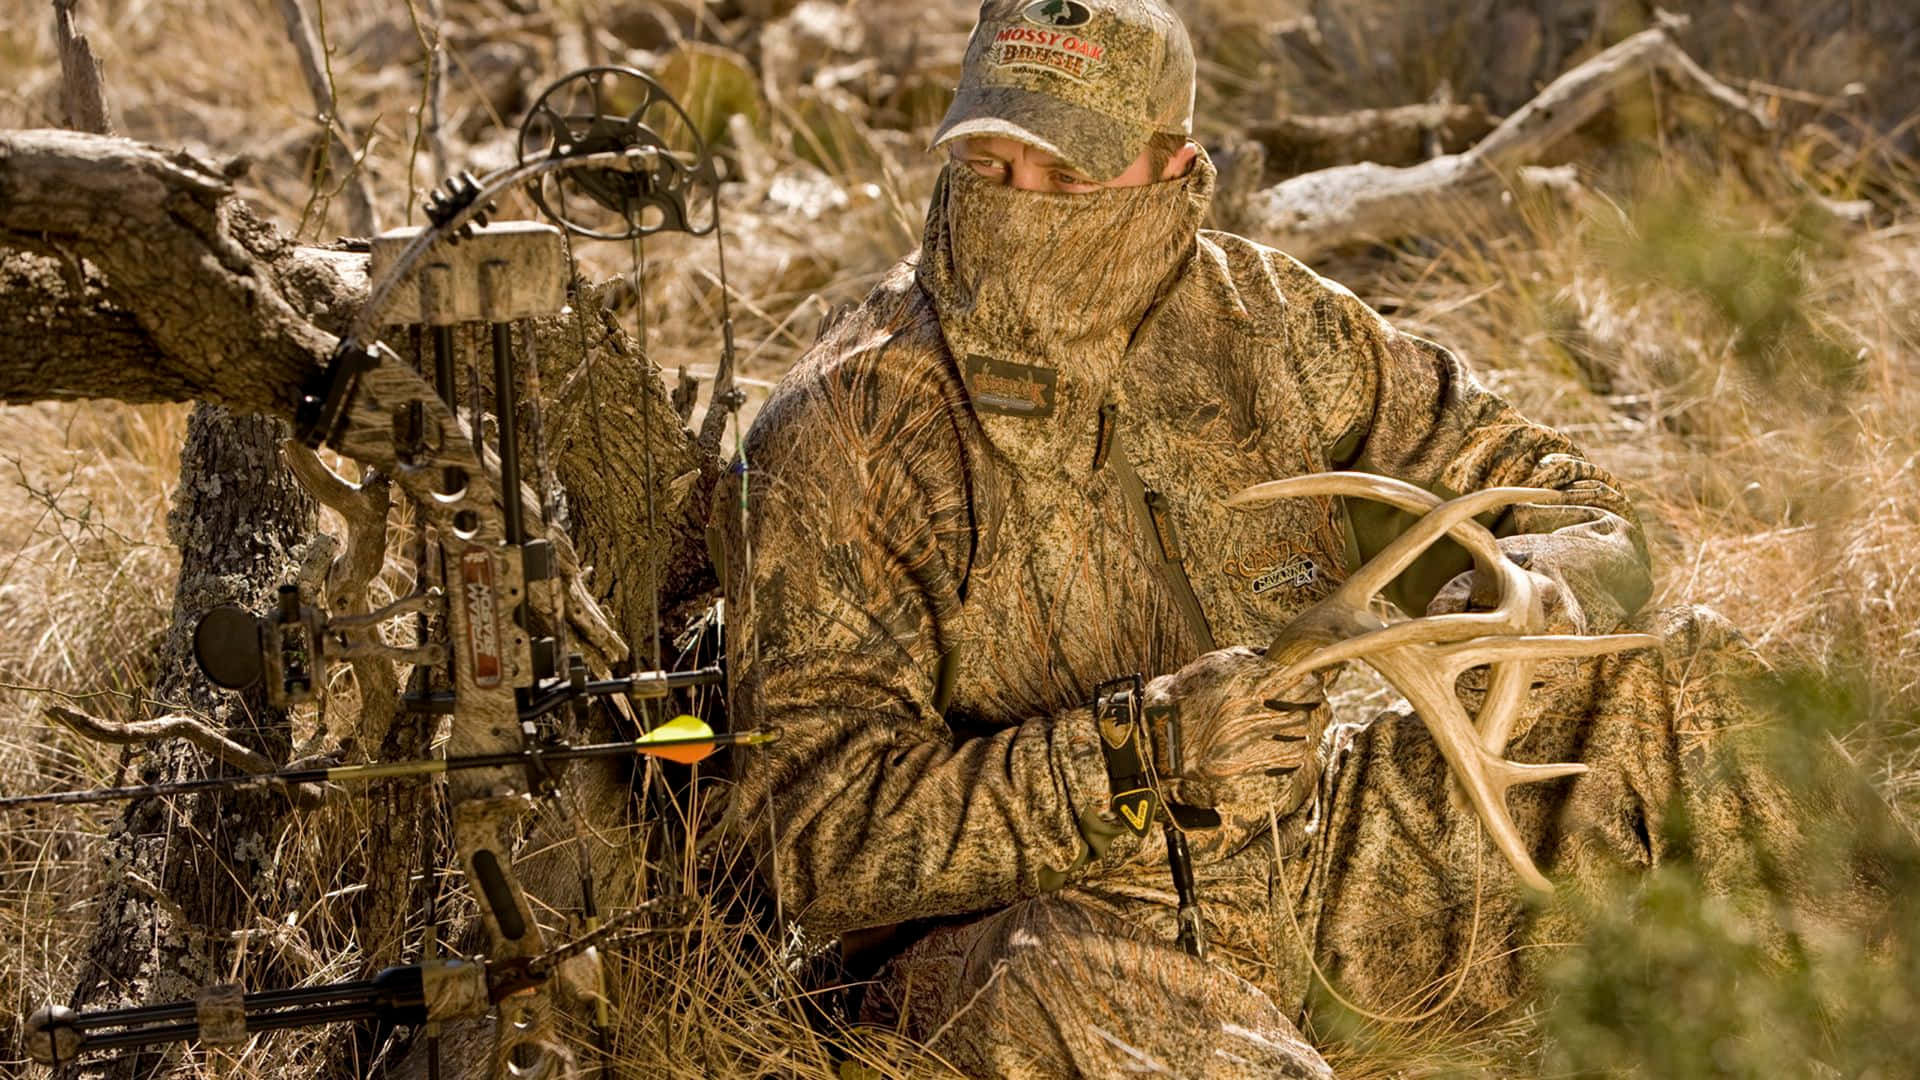 Blend in with nature in stylish camouflage hunting gear. Wallpaper